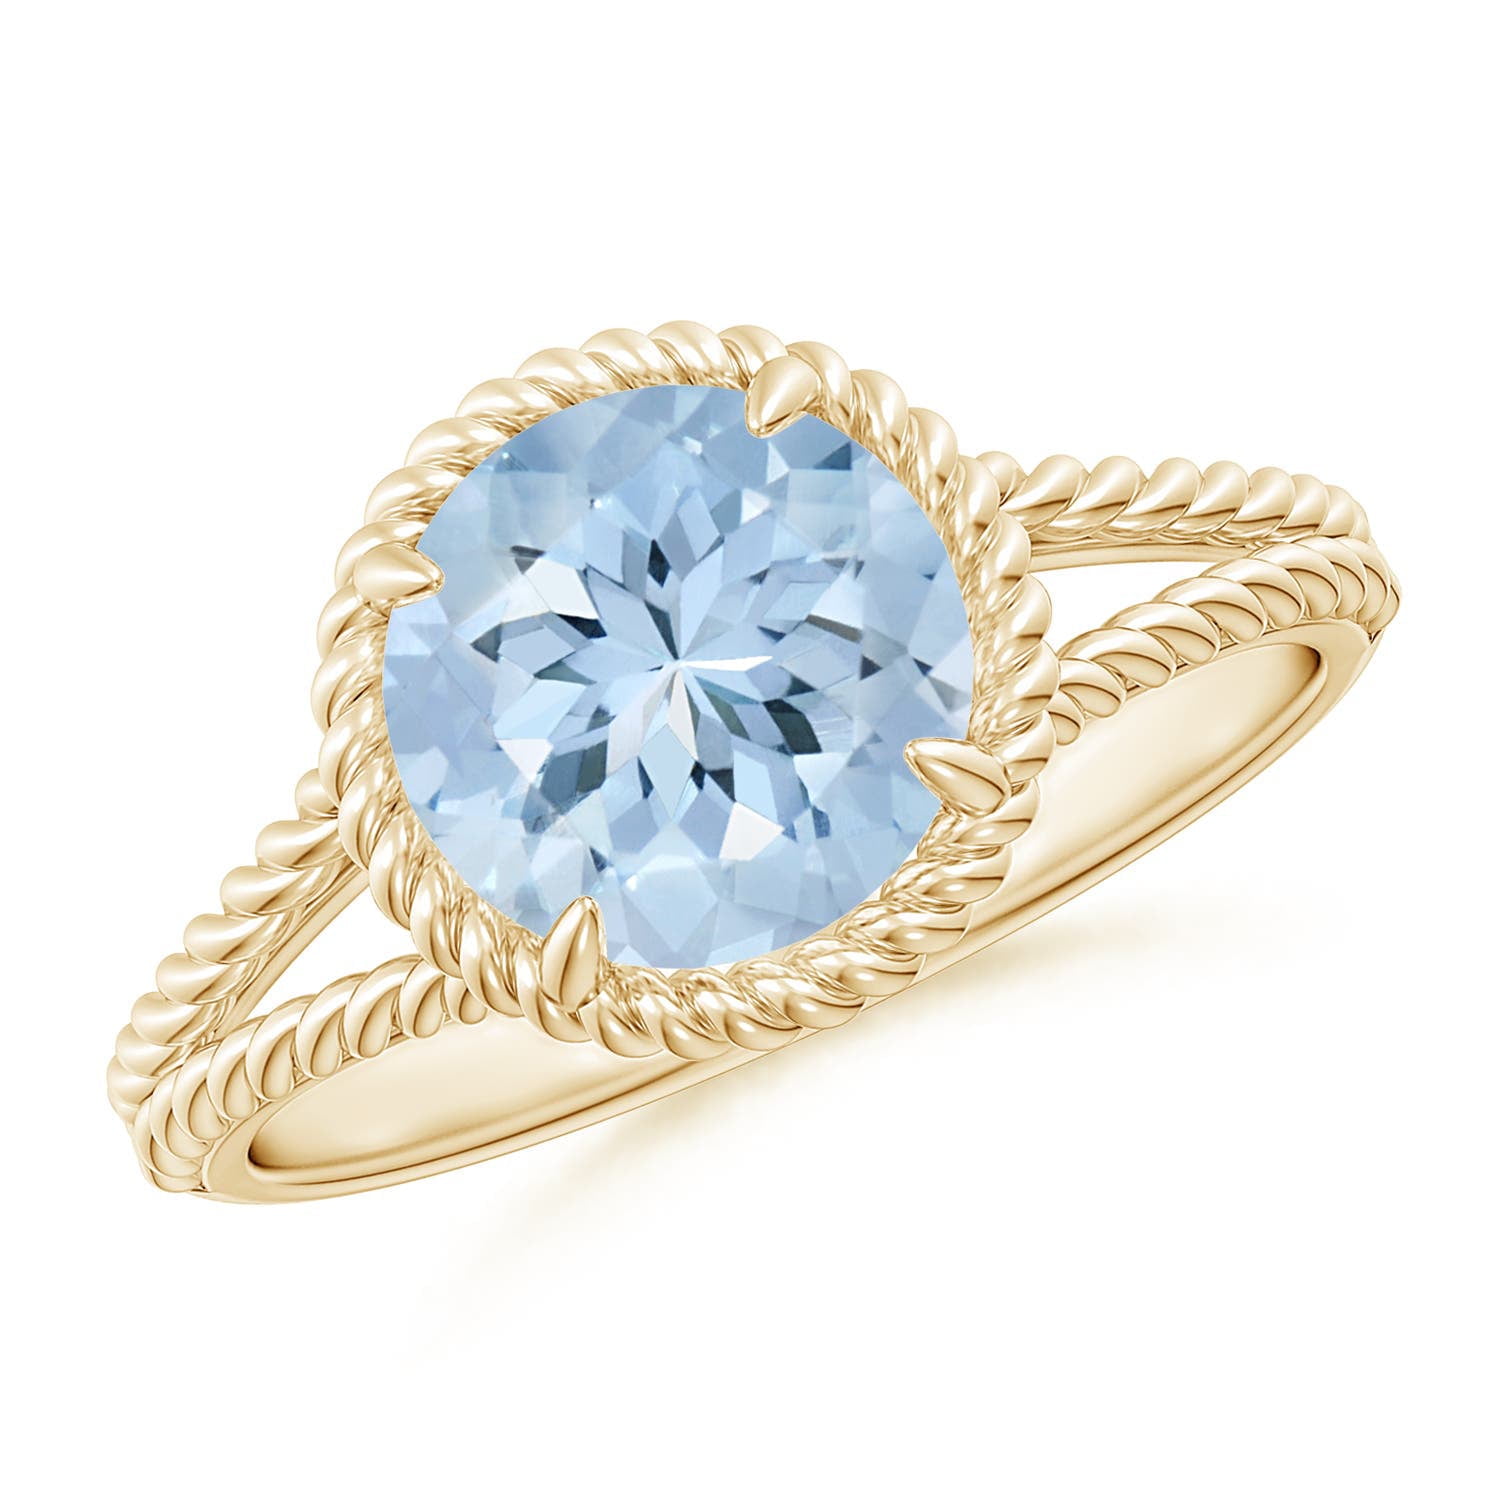 Angara Natural 1.6 Ct. Aquamarine Solitaire Ring in 14K Yellow Gold for ...